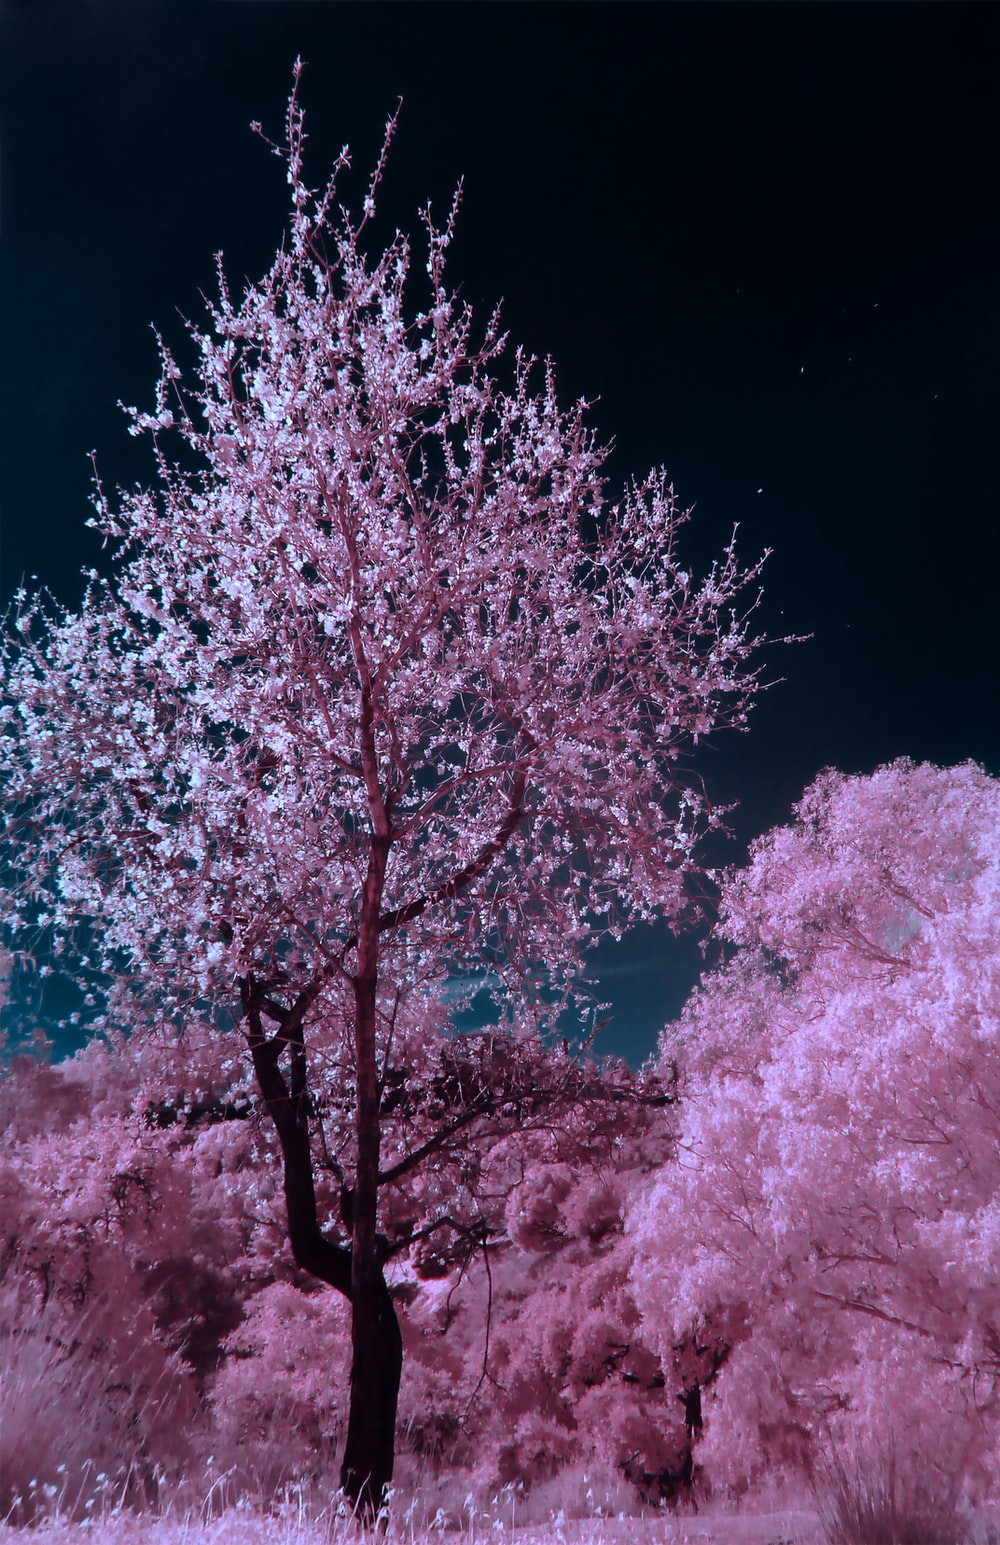 pink and brown cherry blossom tree during nighttime photo